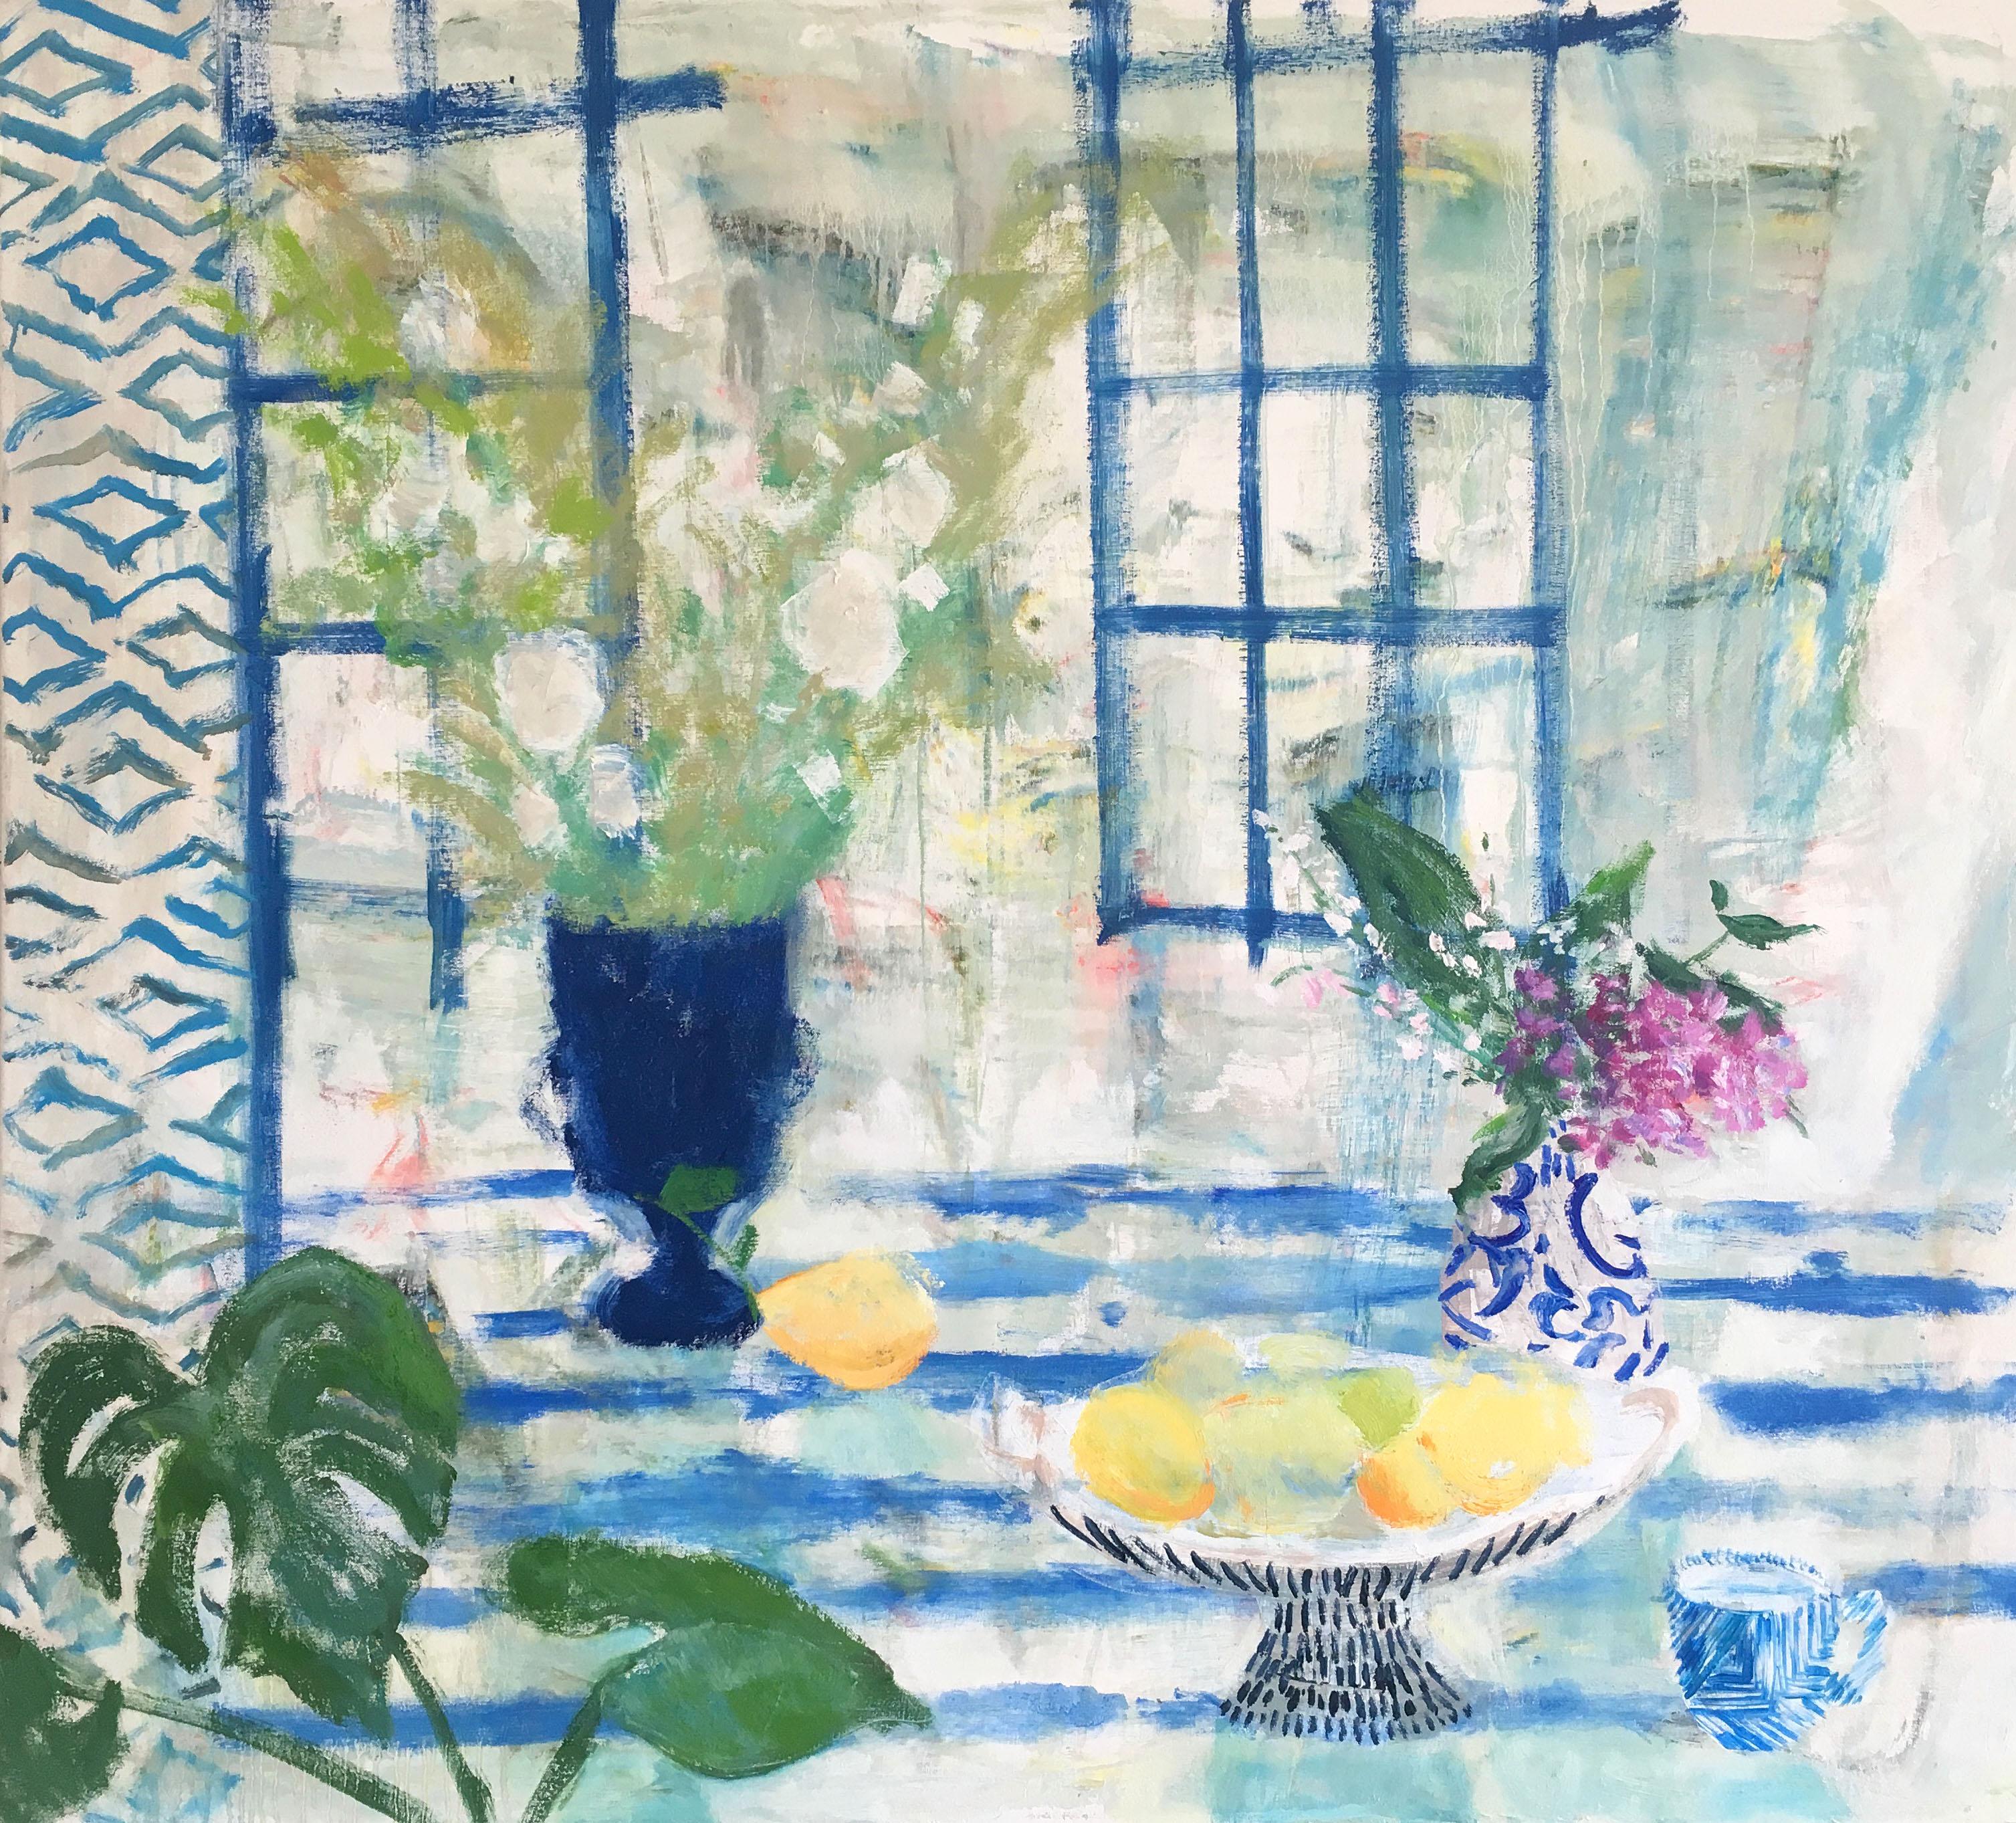 Melanie Parke Interior Painting - Blue Urn, Interior Still Life, Window and Table with Lemons, Lilac, Blue Vase